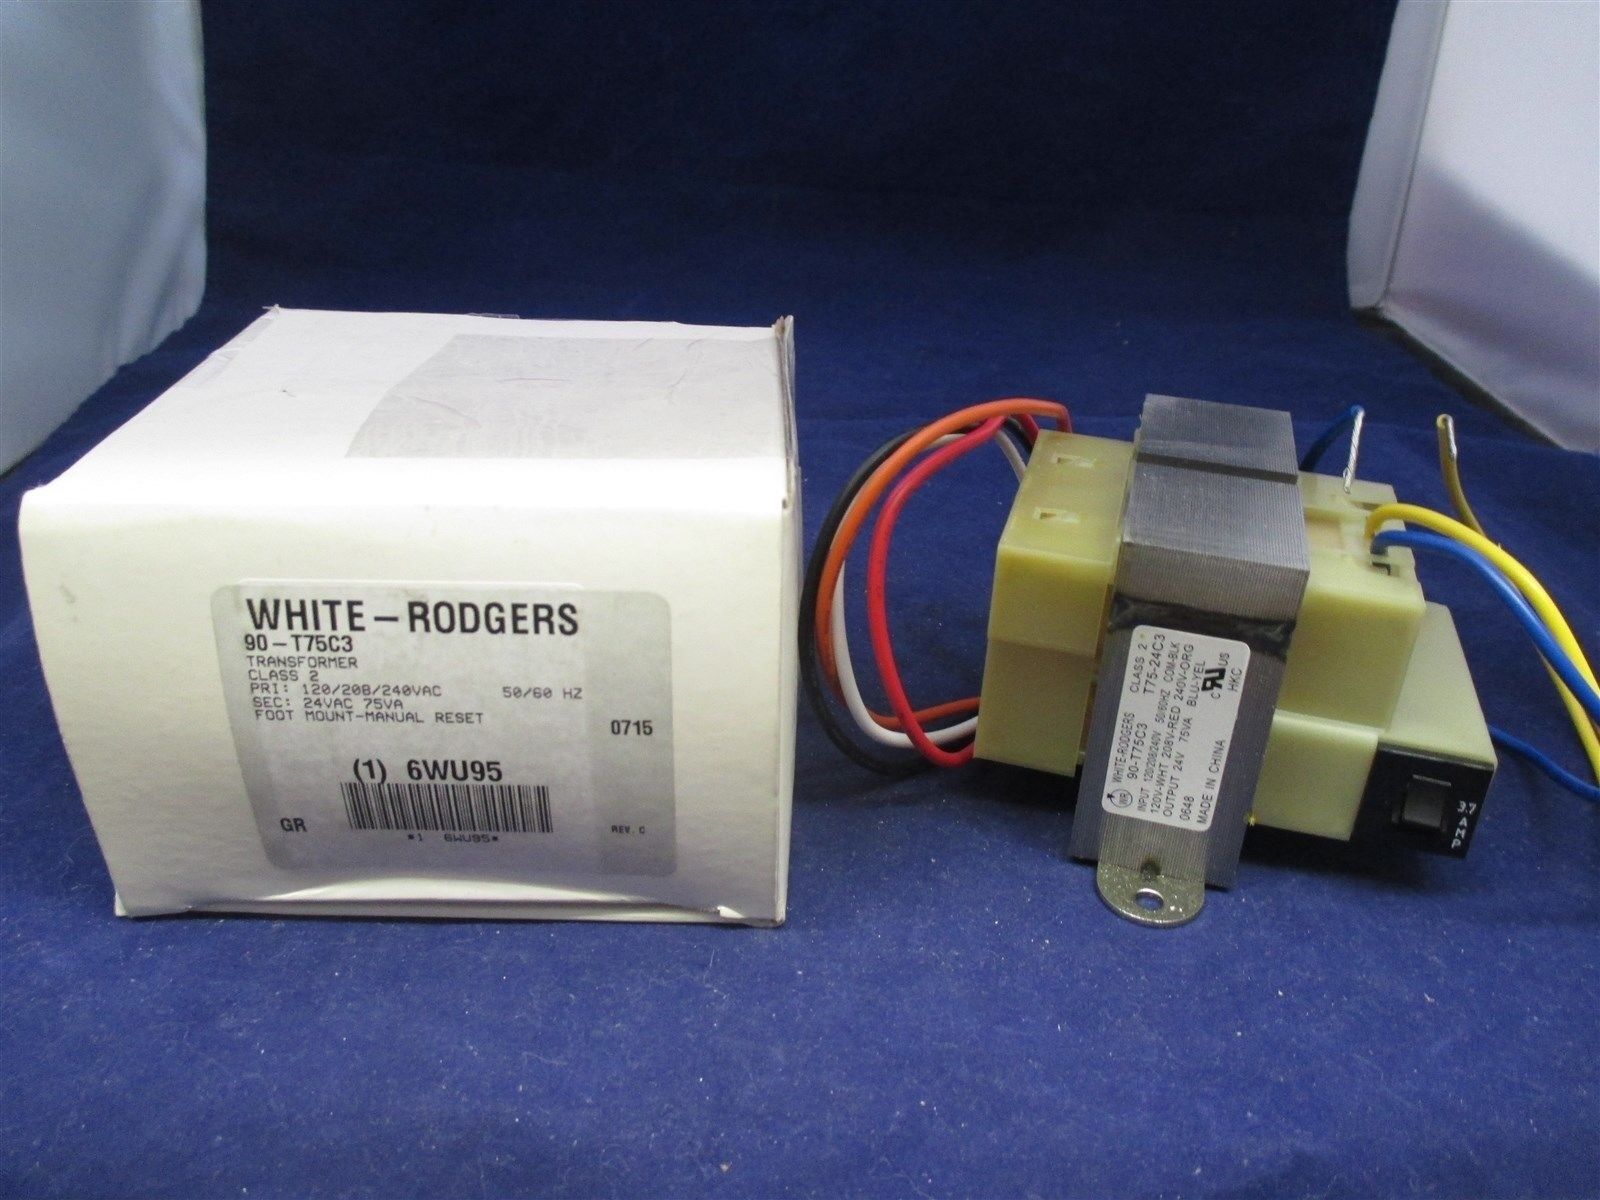 White-Rodgers Transformer 90-T75C3 new